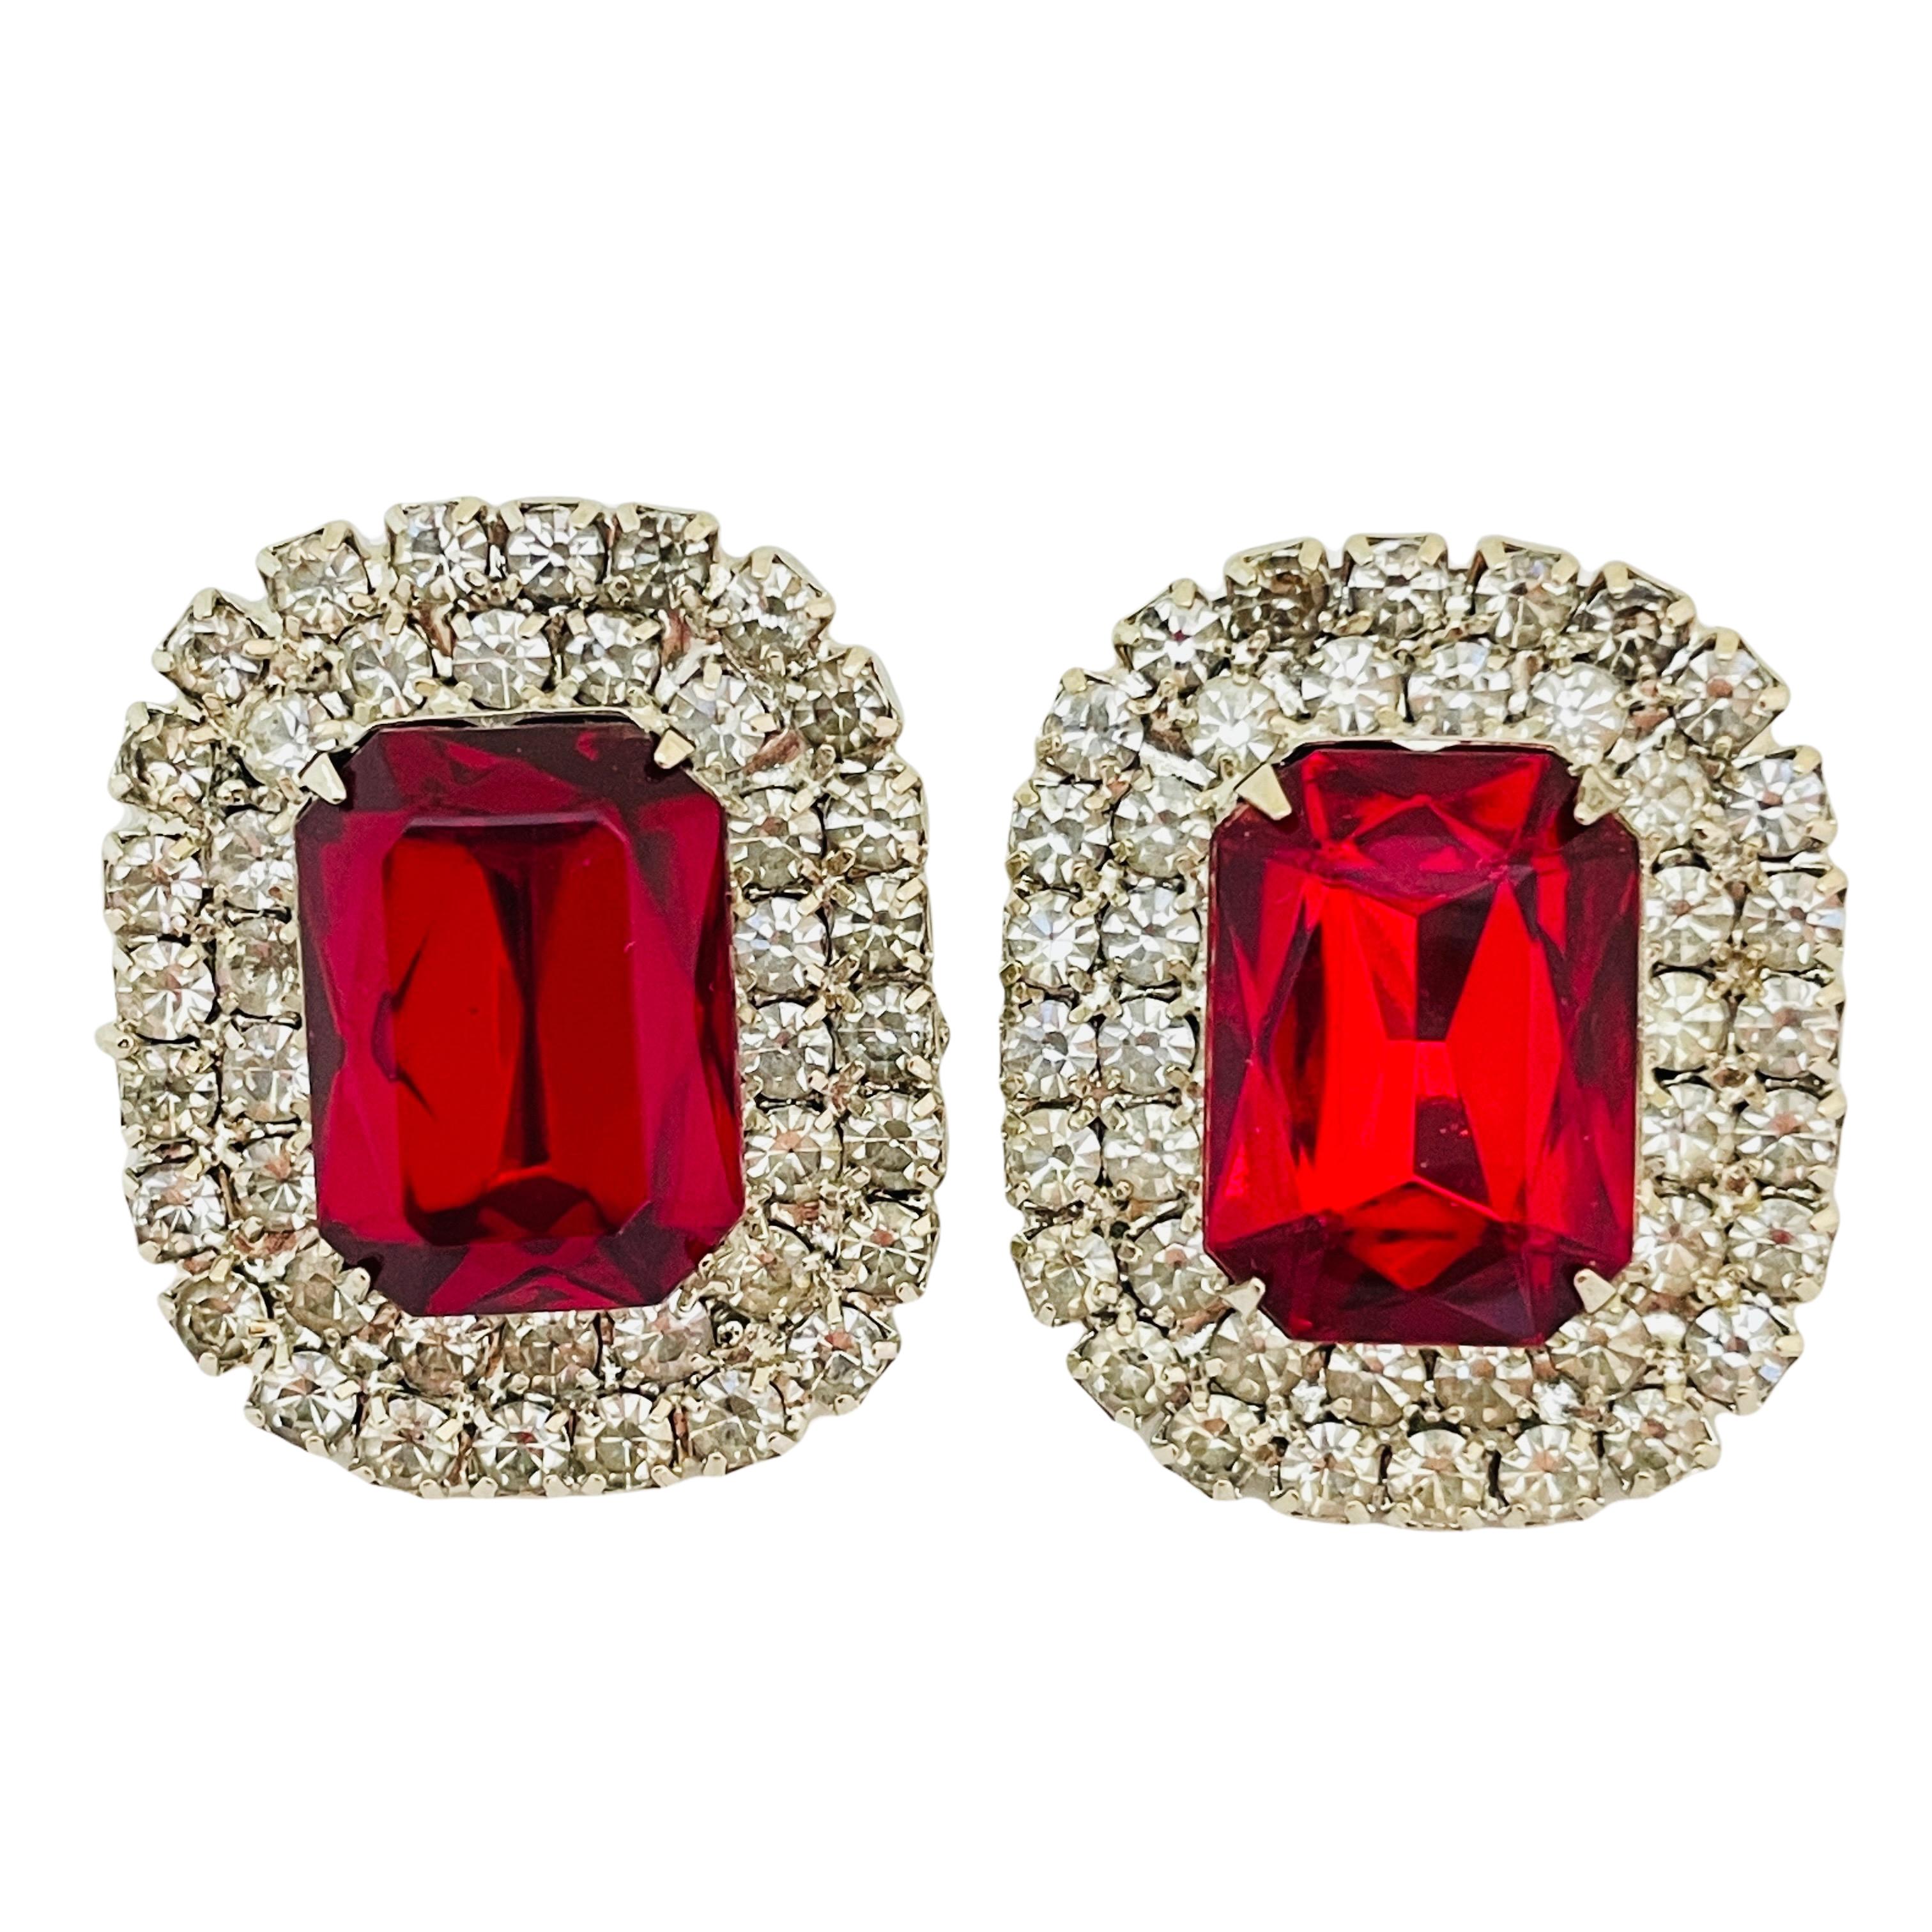 Vintage silver tone ruby red faceted glass stones pierced designer earrings In Good Condition For Sale In Palos Hills, IL